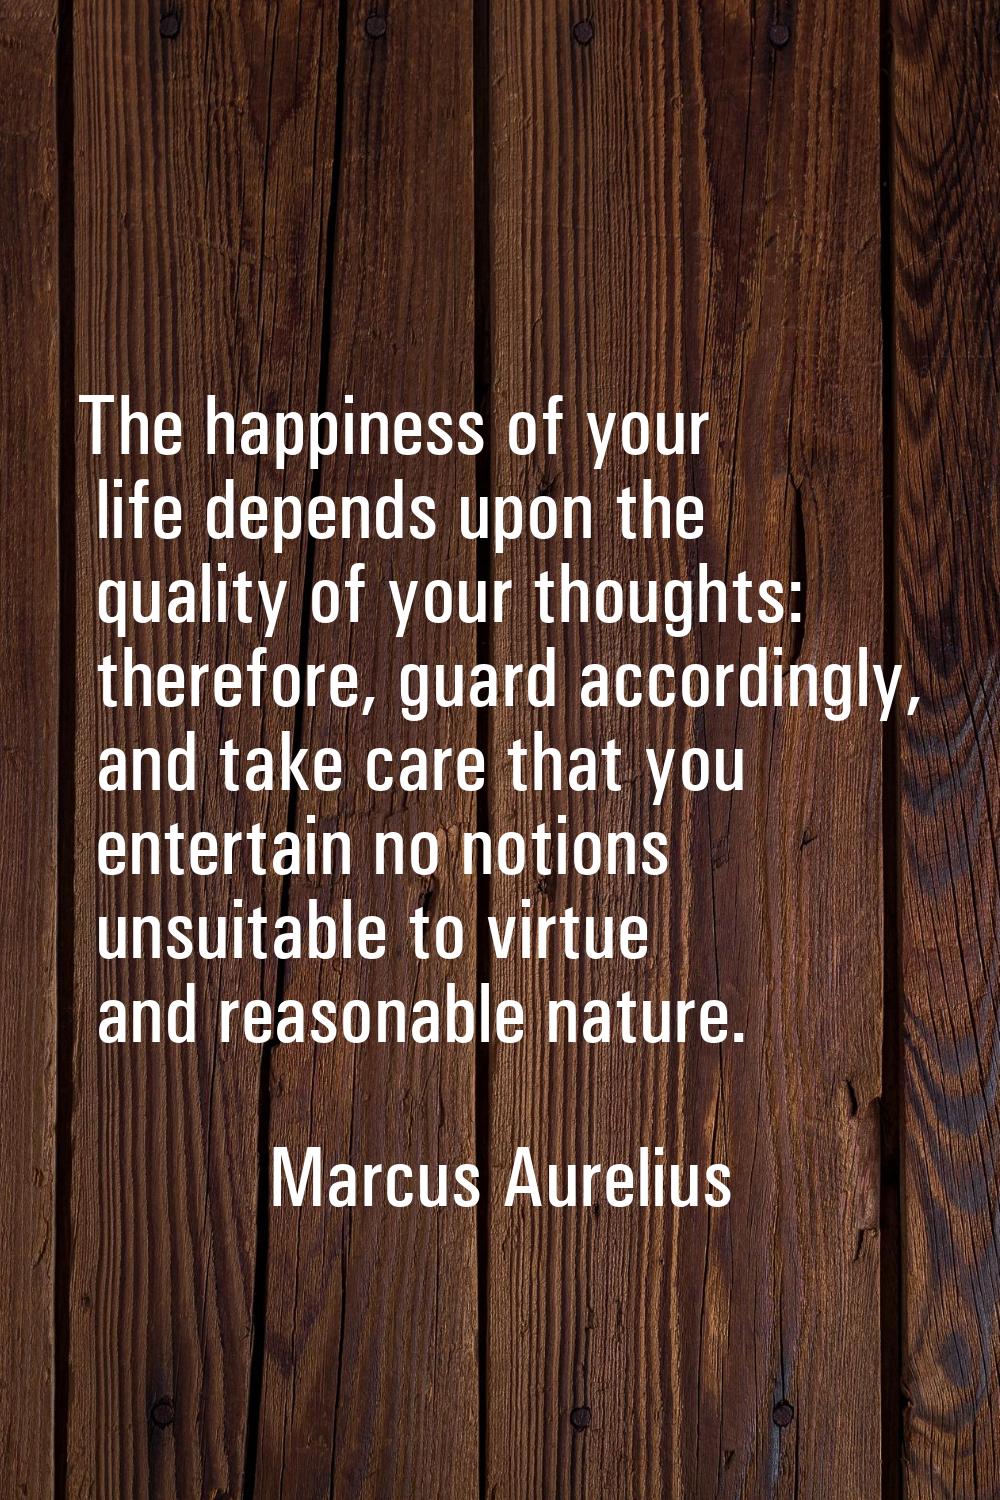 The happiness of your life depends upon the quality of your thoughts: therefore, guard accordingly,